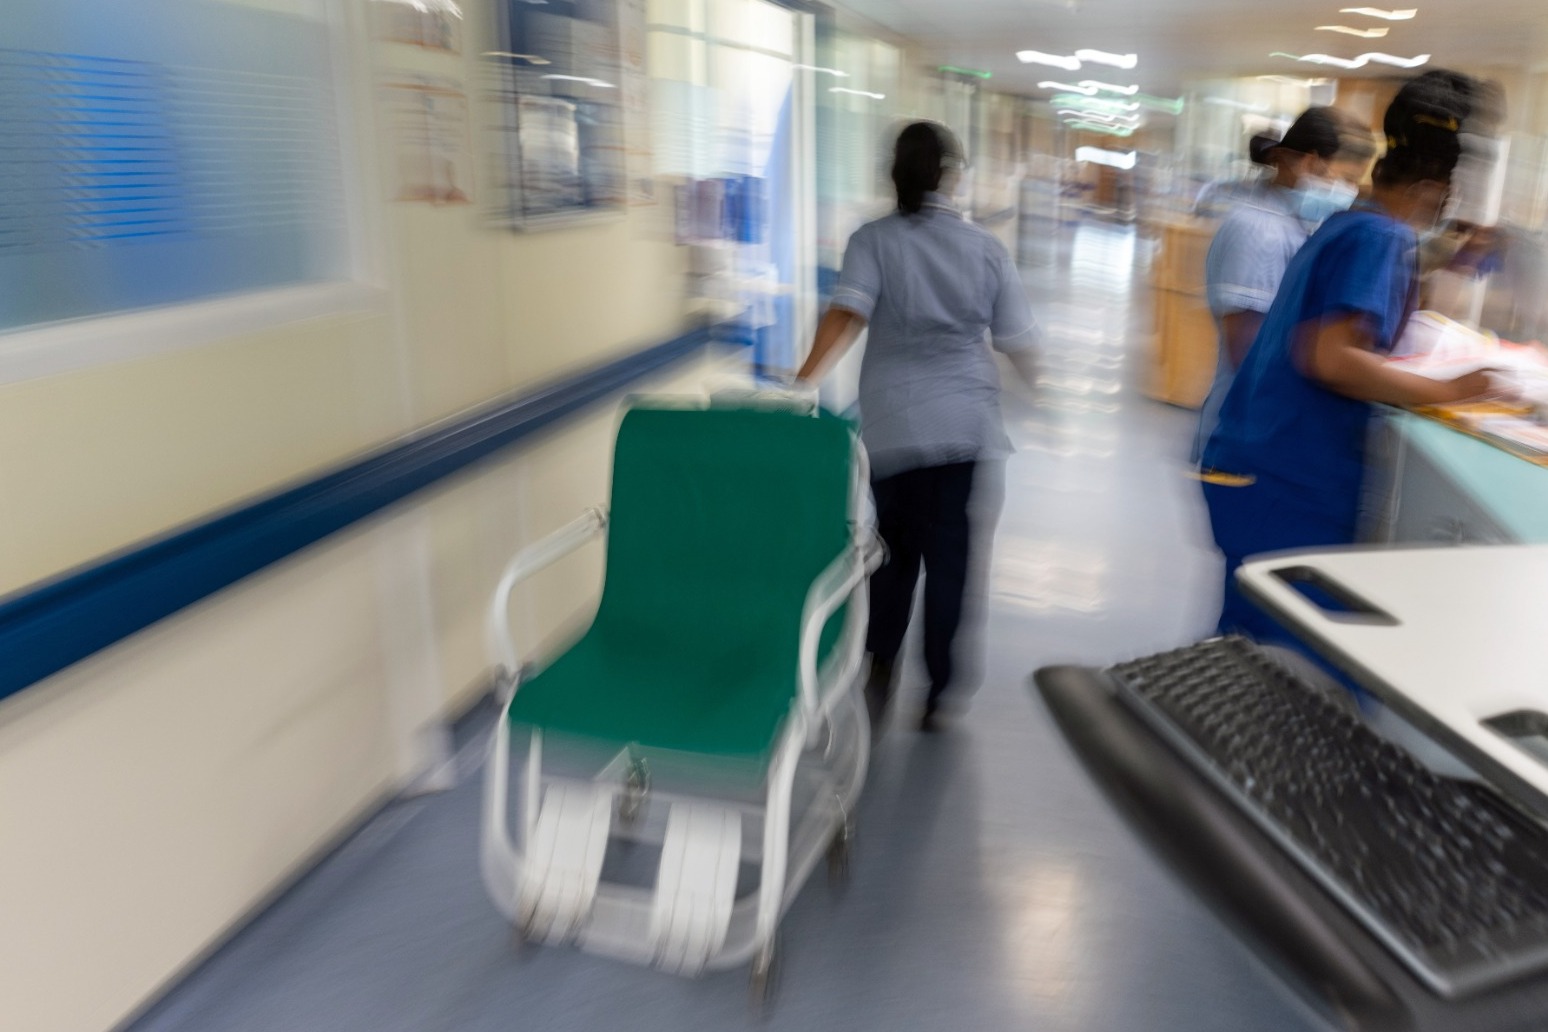 New hospitals beset by delay and indecision